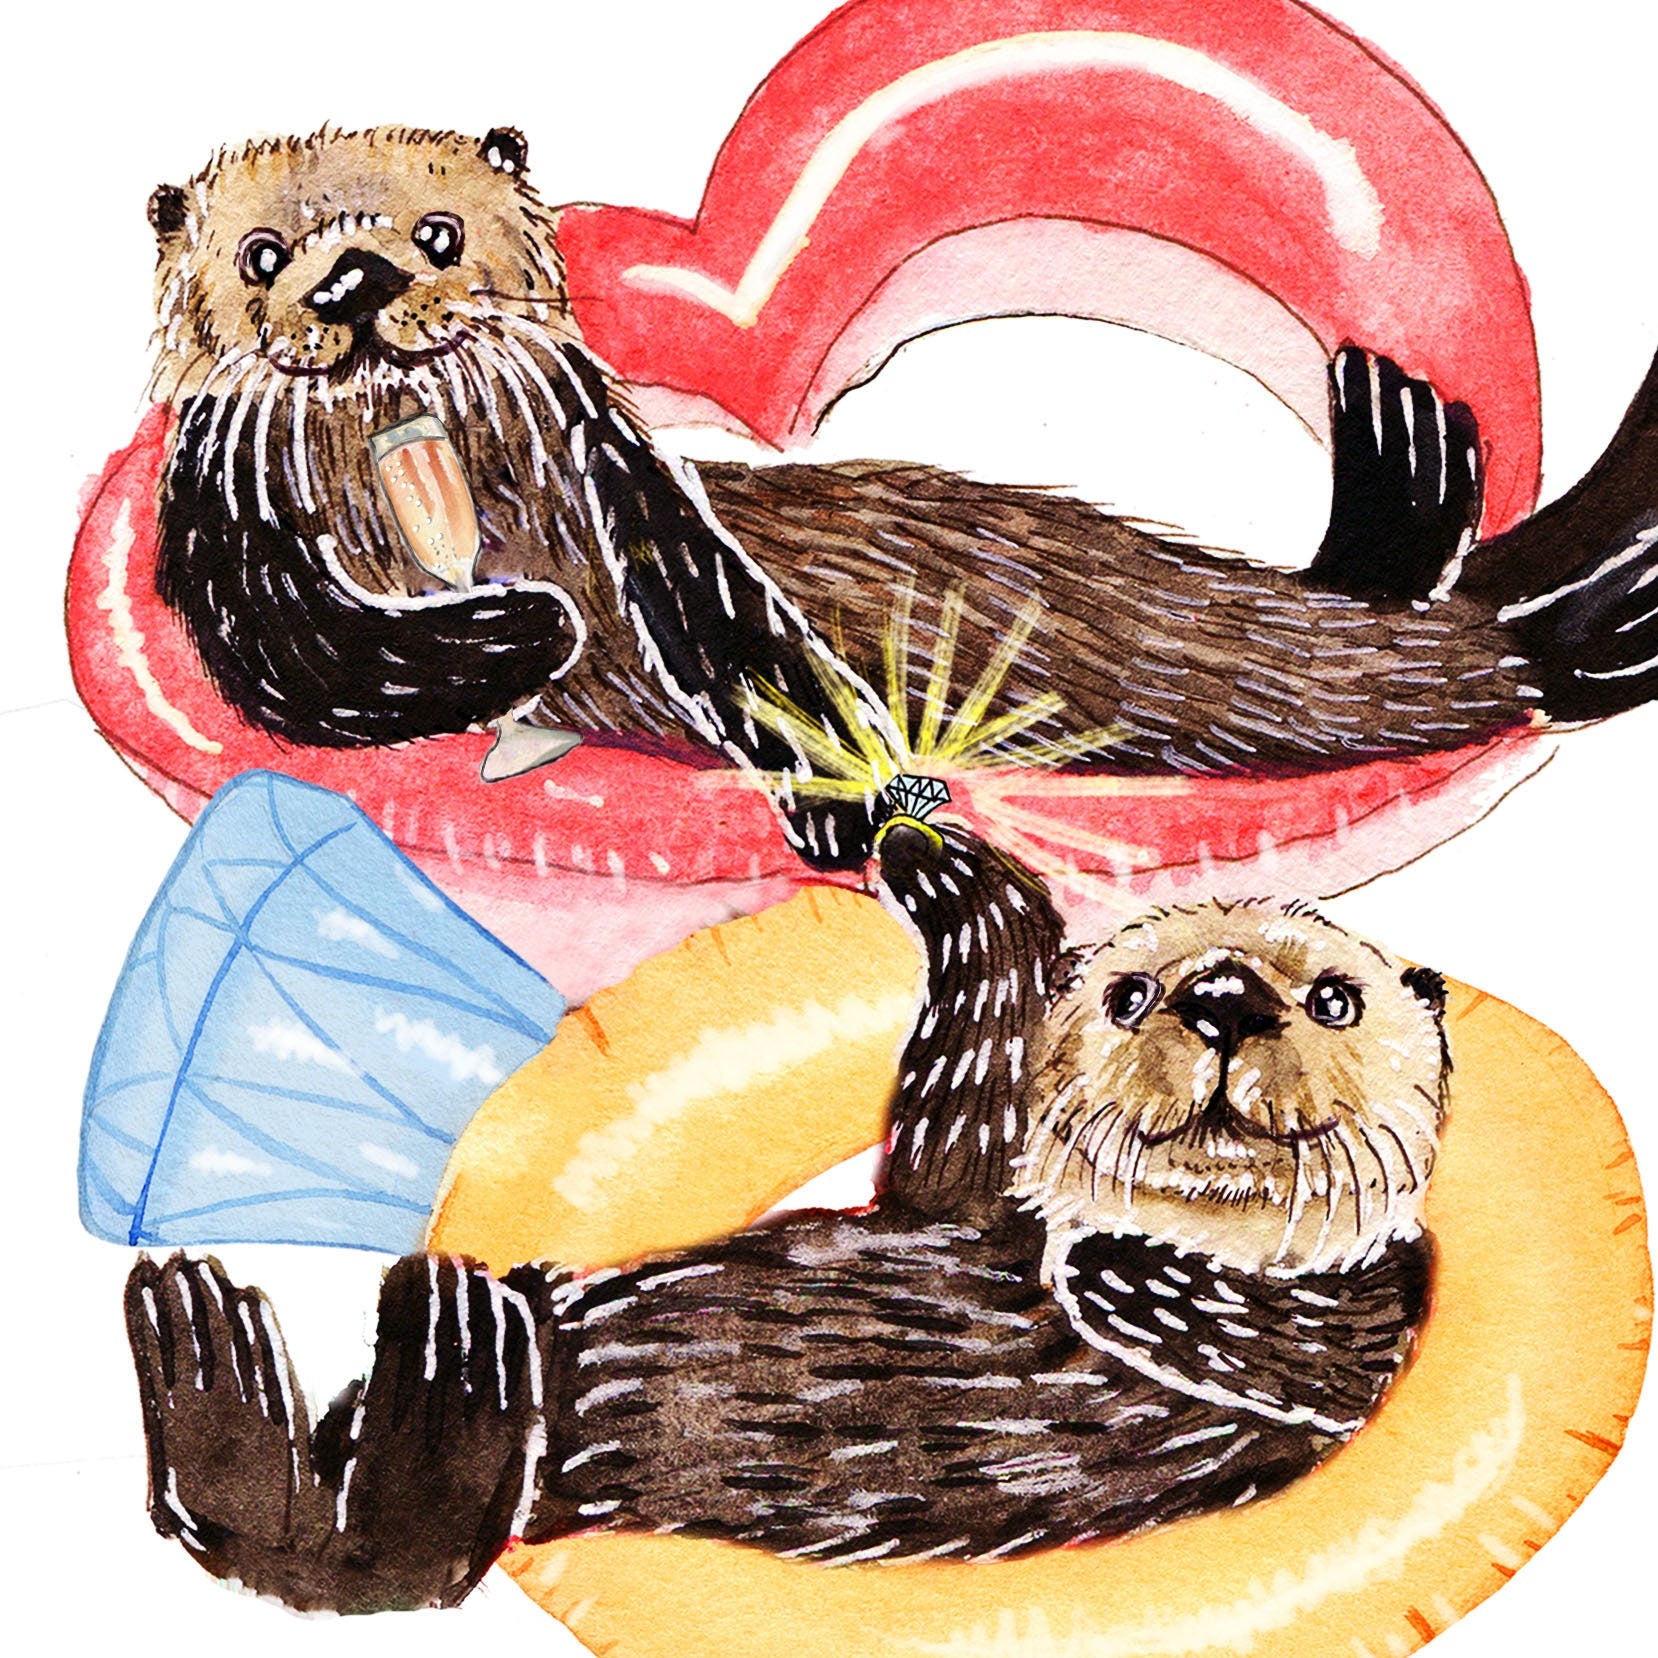 Significant Otter Funny Wedding Card For Friends - Congrats On Engagement Card Funny